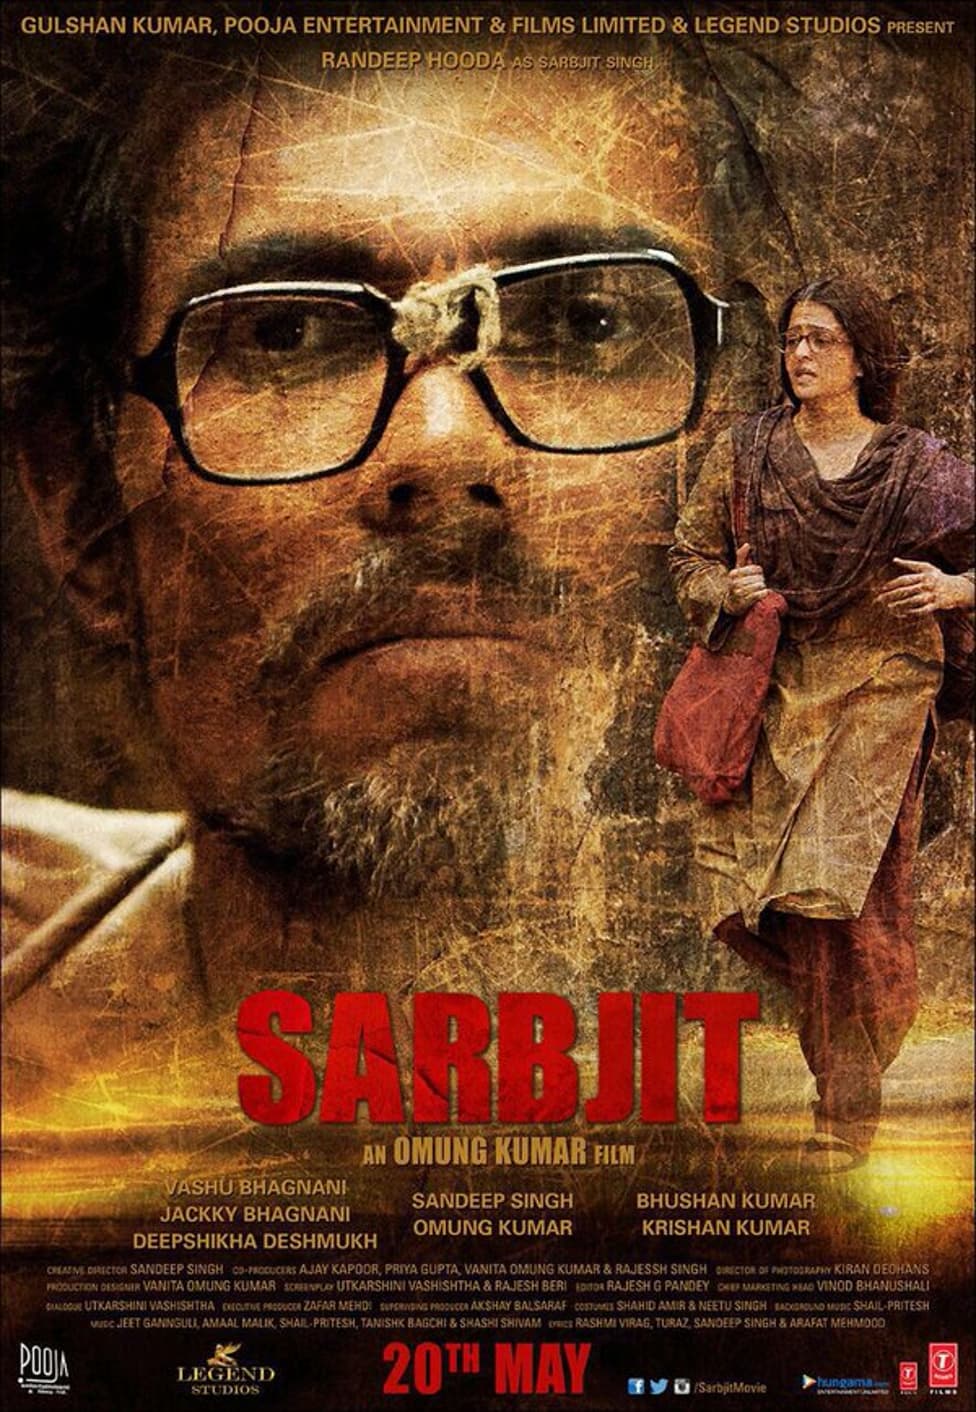 Box Office Report: Sarbjit Has a Slow Monday at the Ticket Window